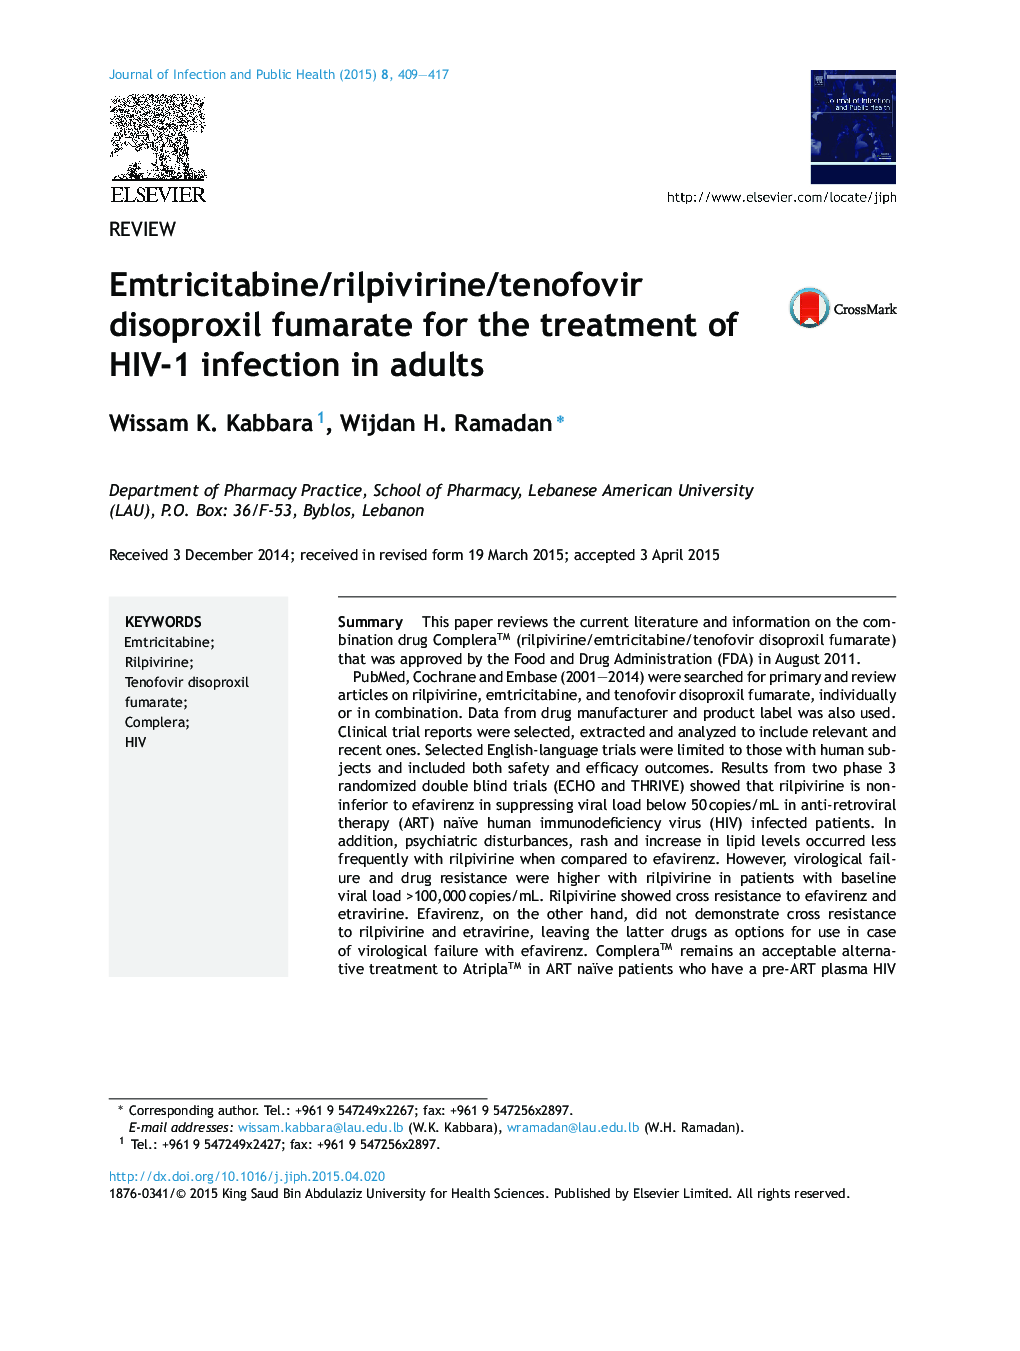 Emtricitabine/rilpivirine/tenofovir disoproxil fumarate for the treatment of HIV-1 infection in adults